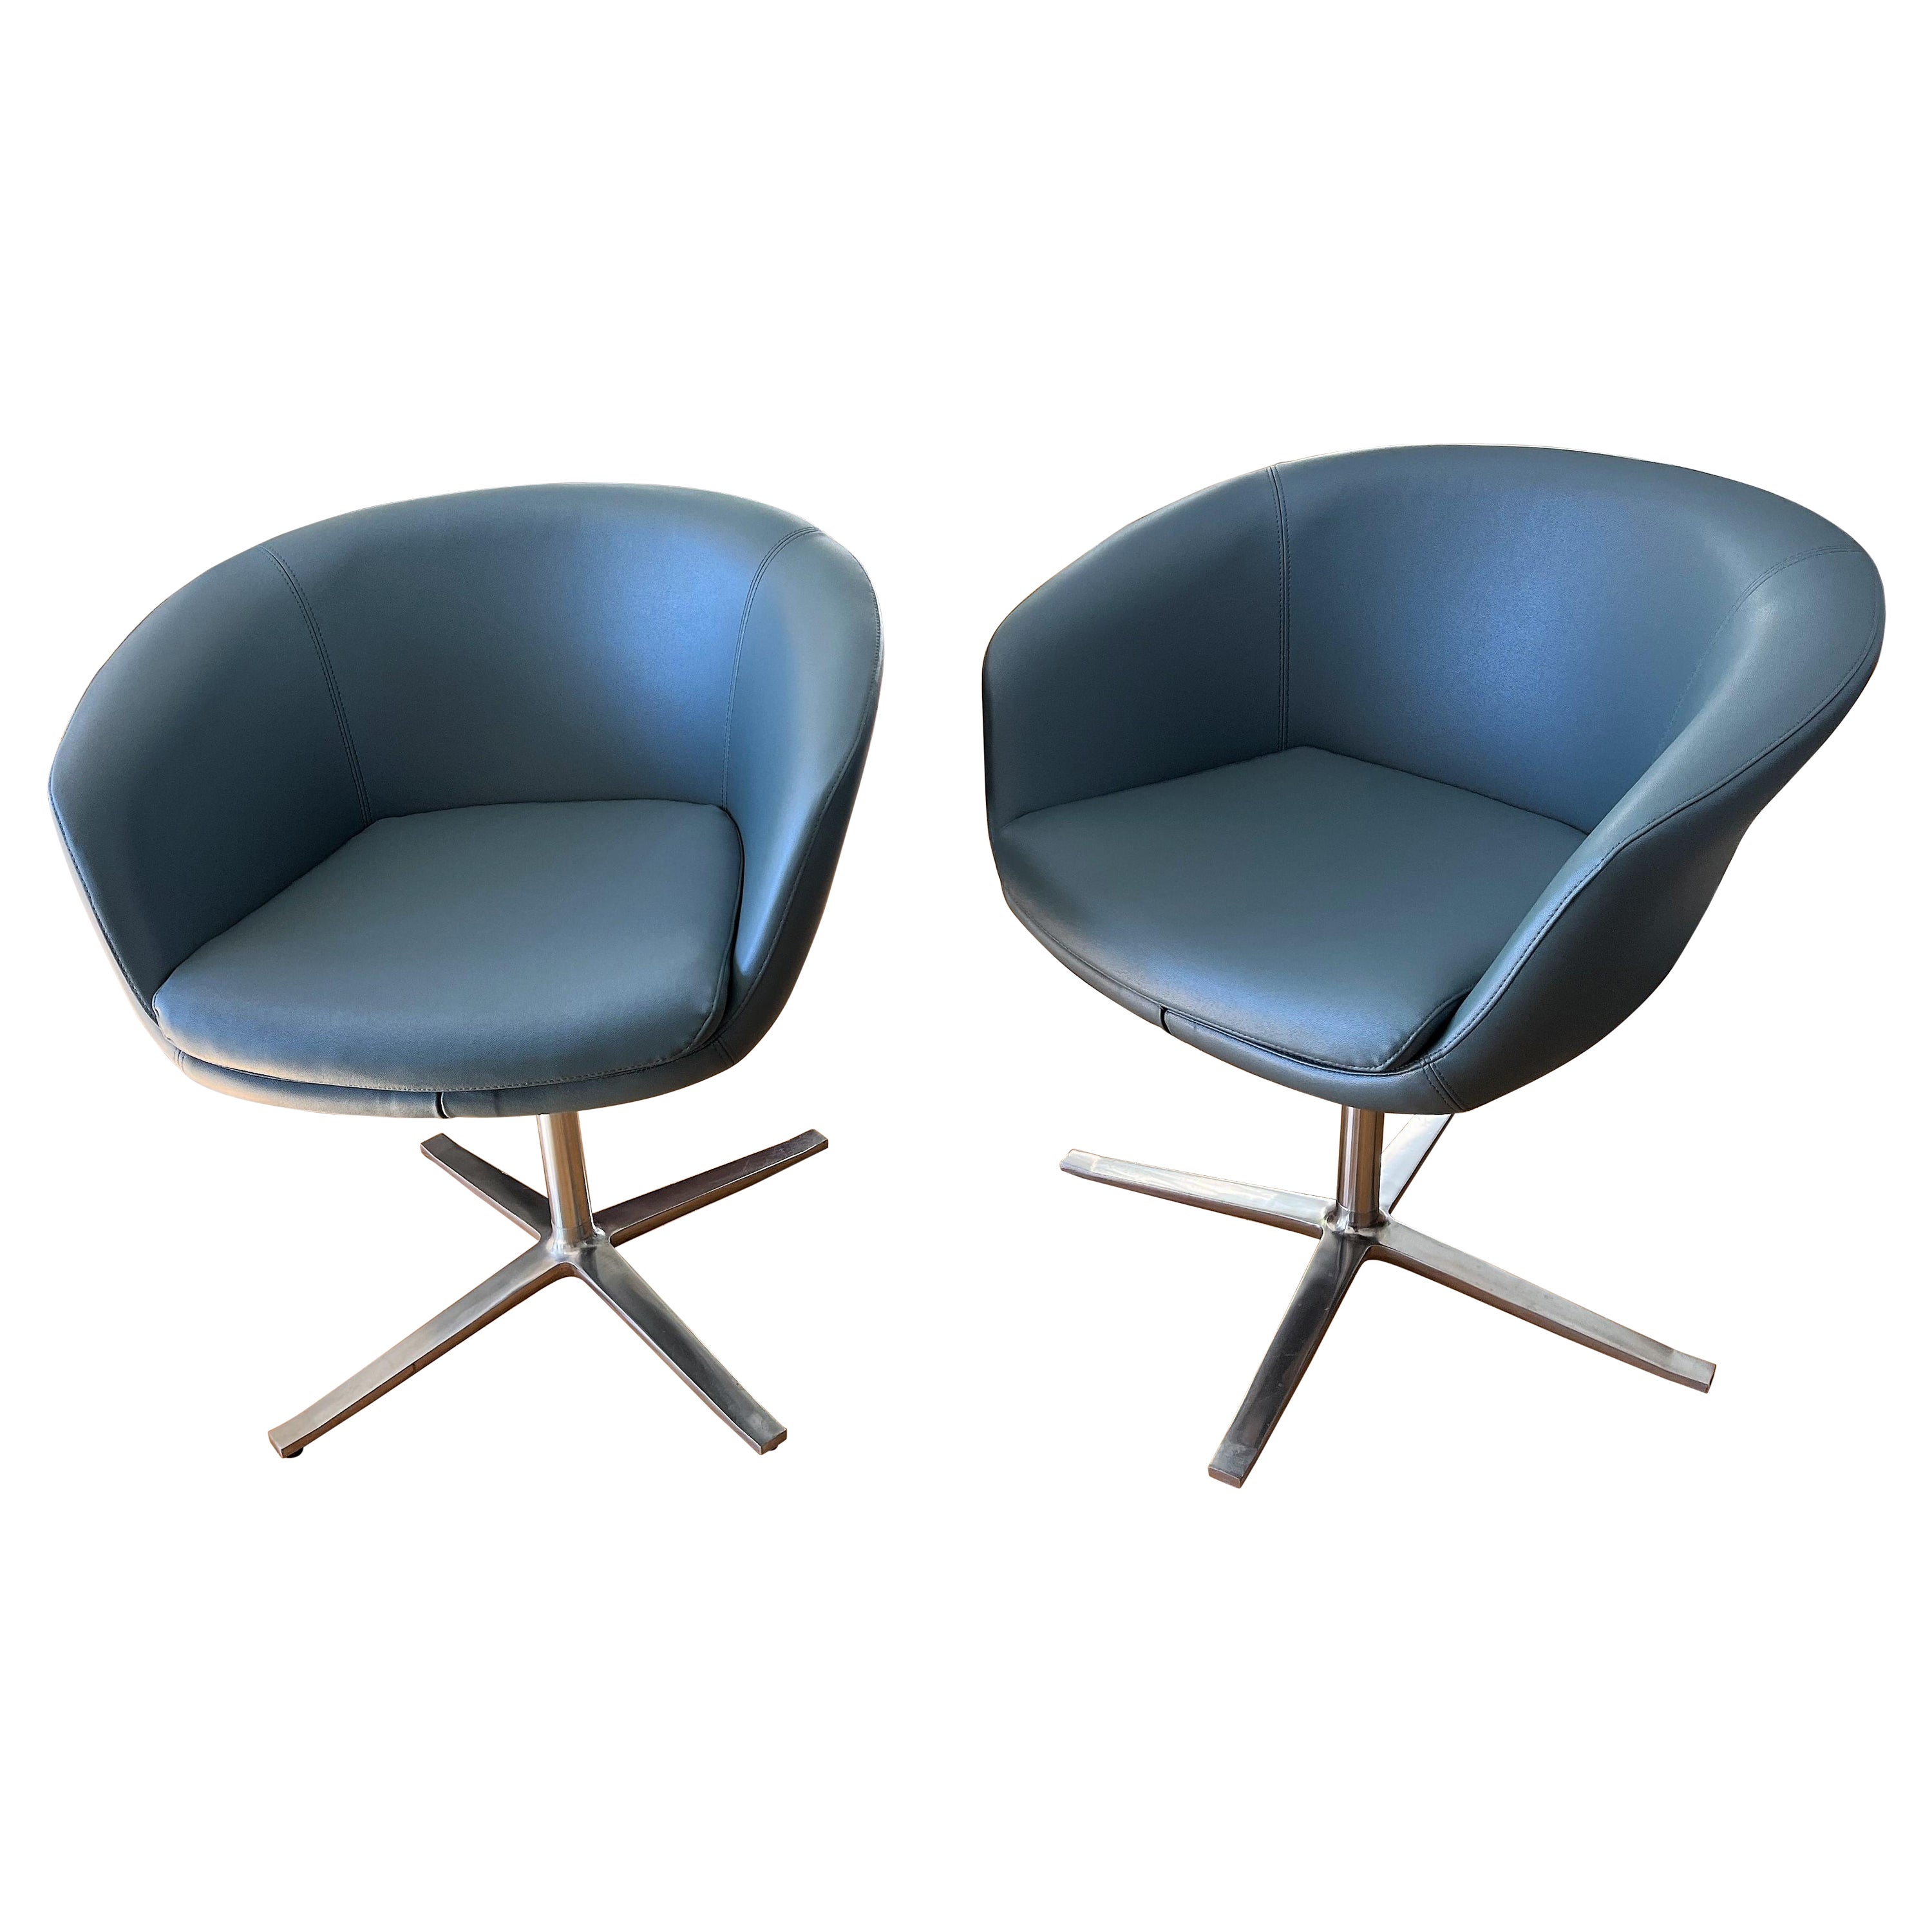 Steelcase Coalesse Blue Leather Chairs, Bob Collection, Designer Pearson Lloyd